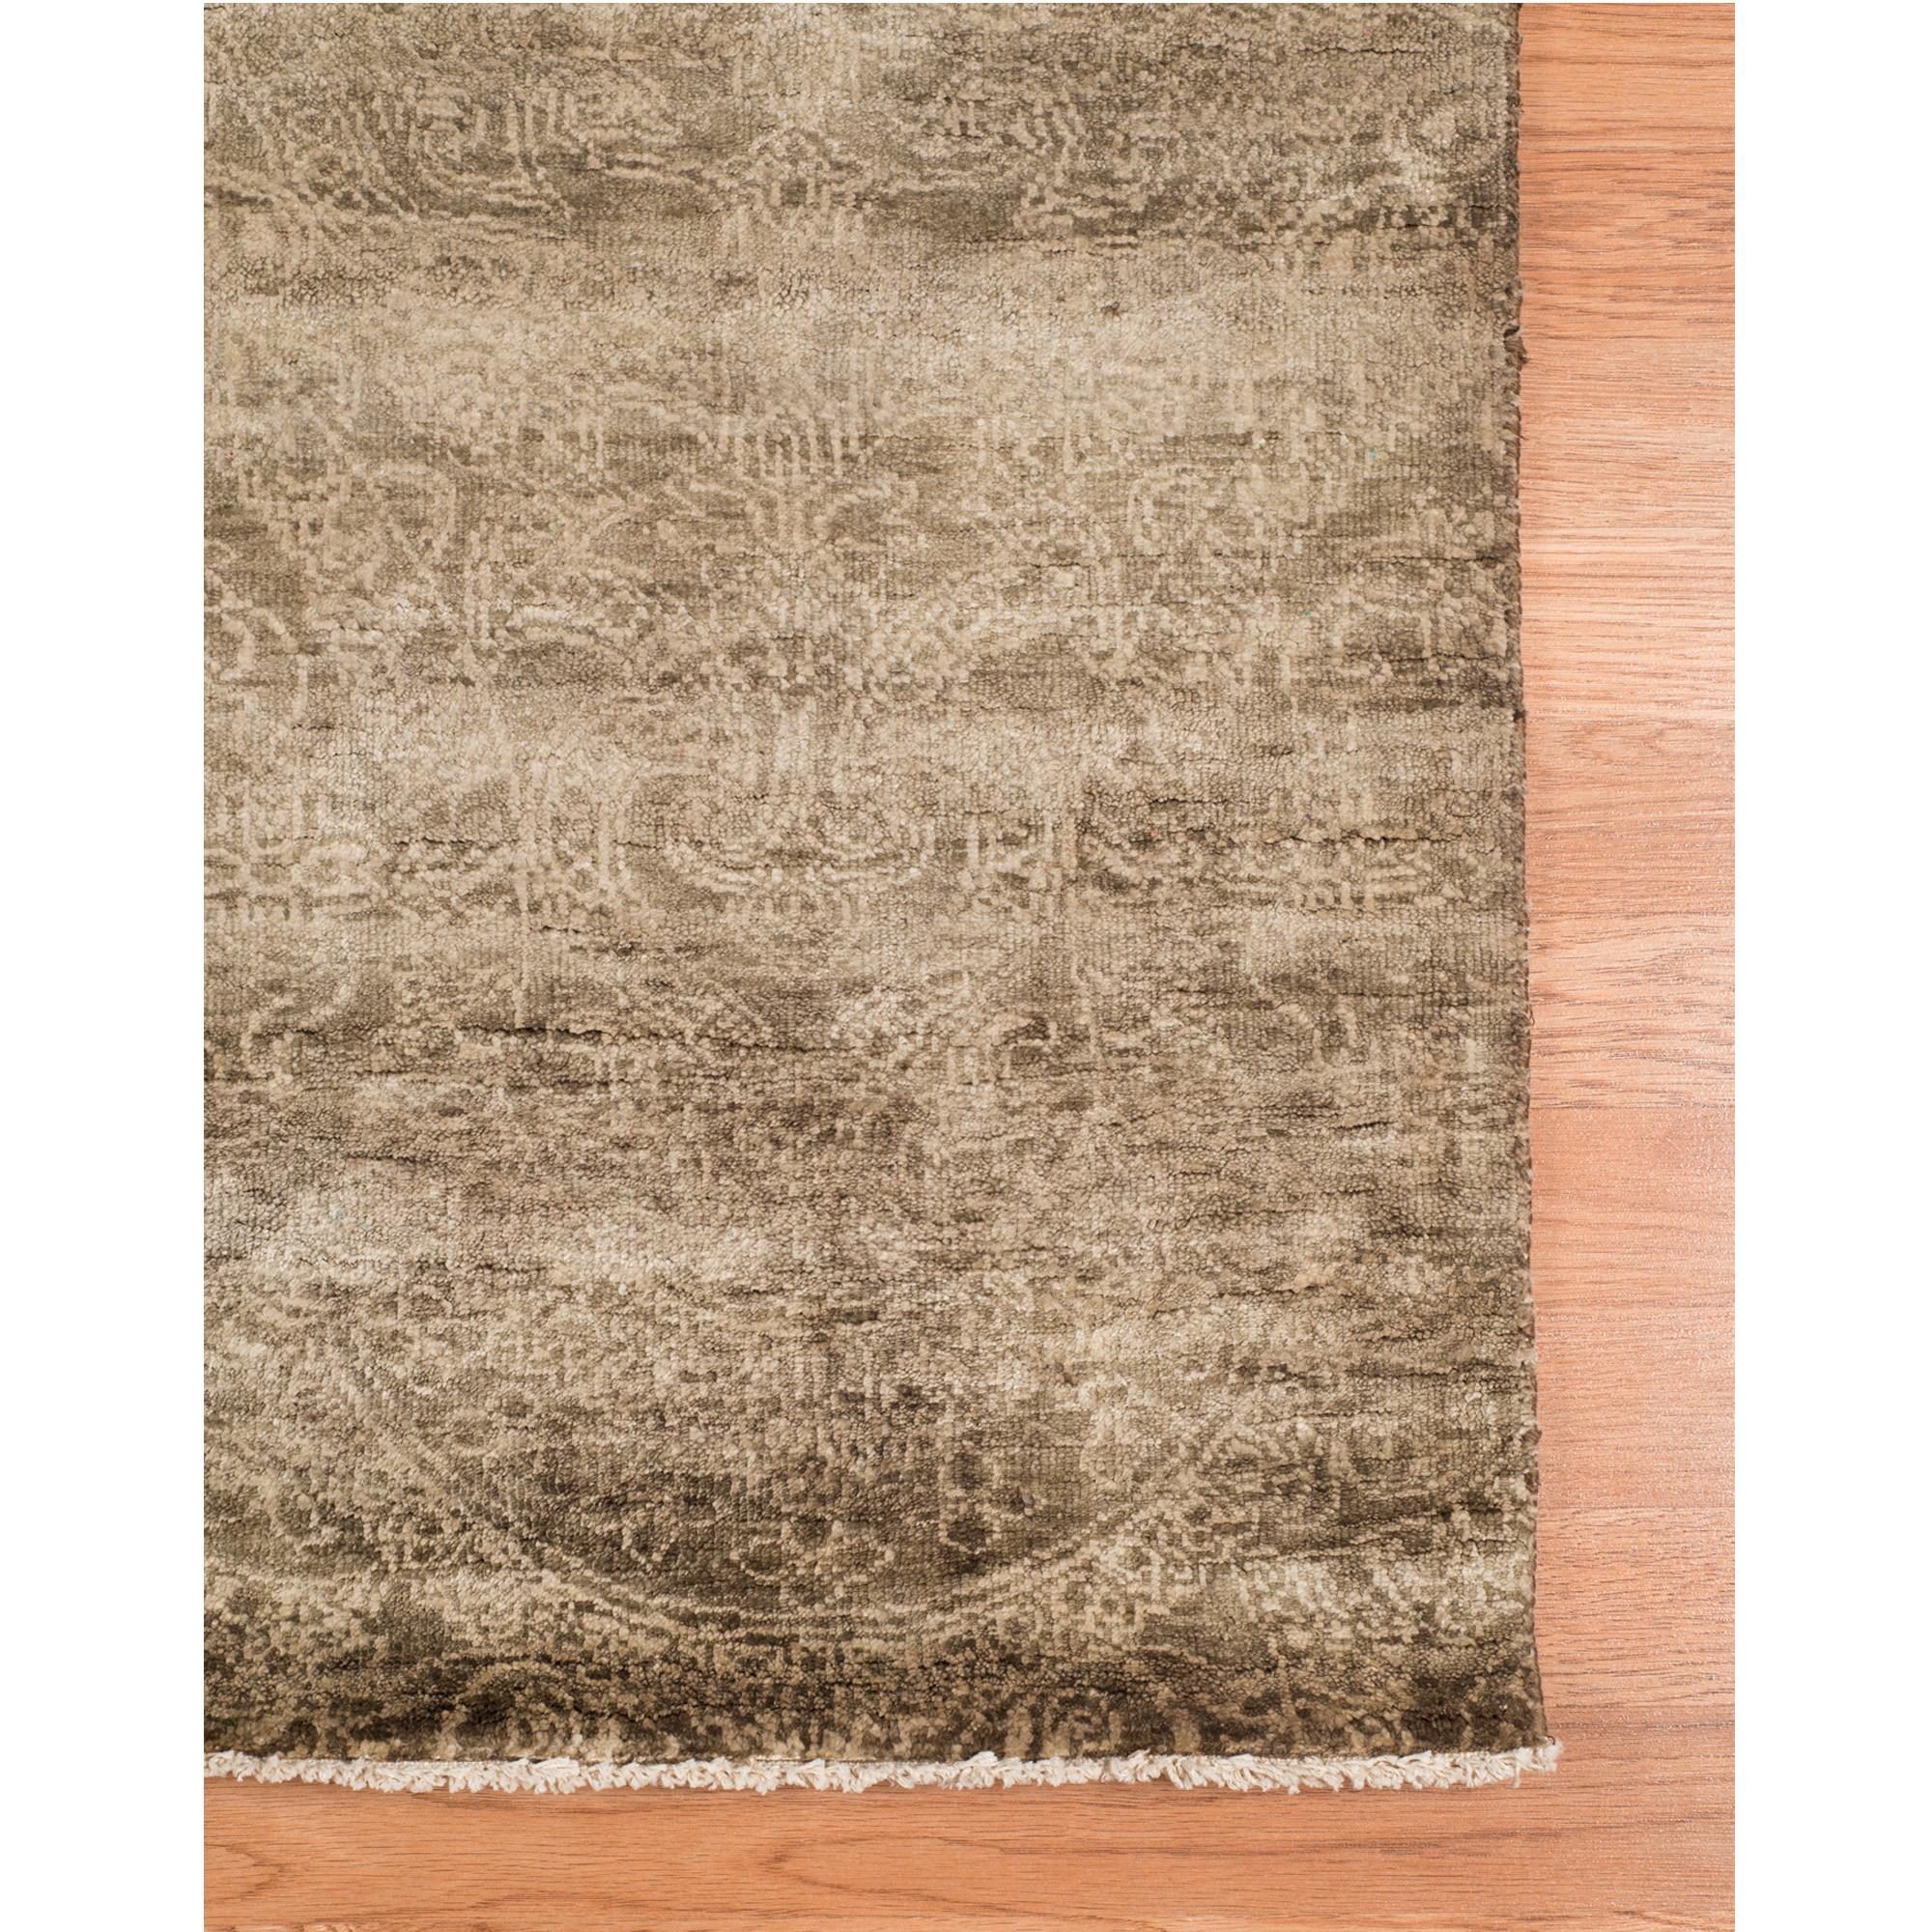 8' X 10' Ombre Brown Distressed Paisley Handmade Area Rug